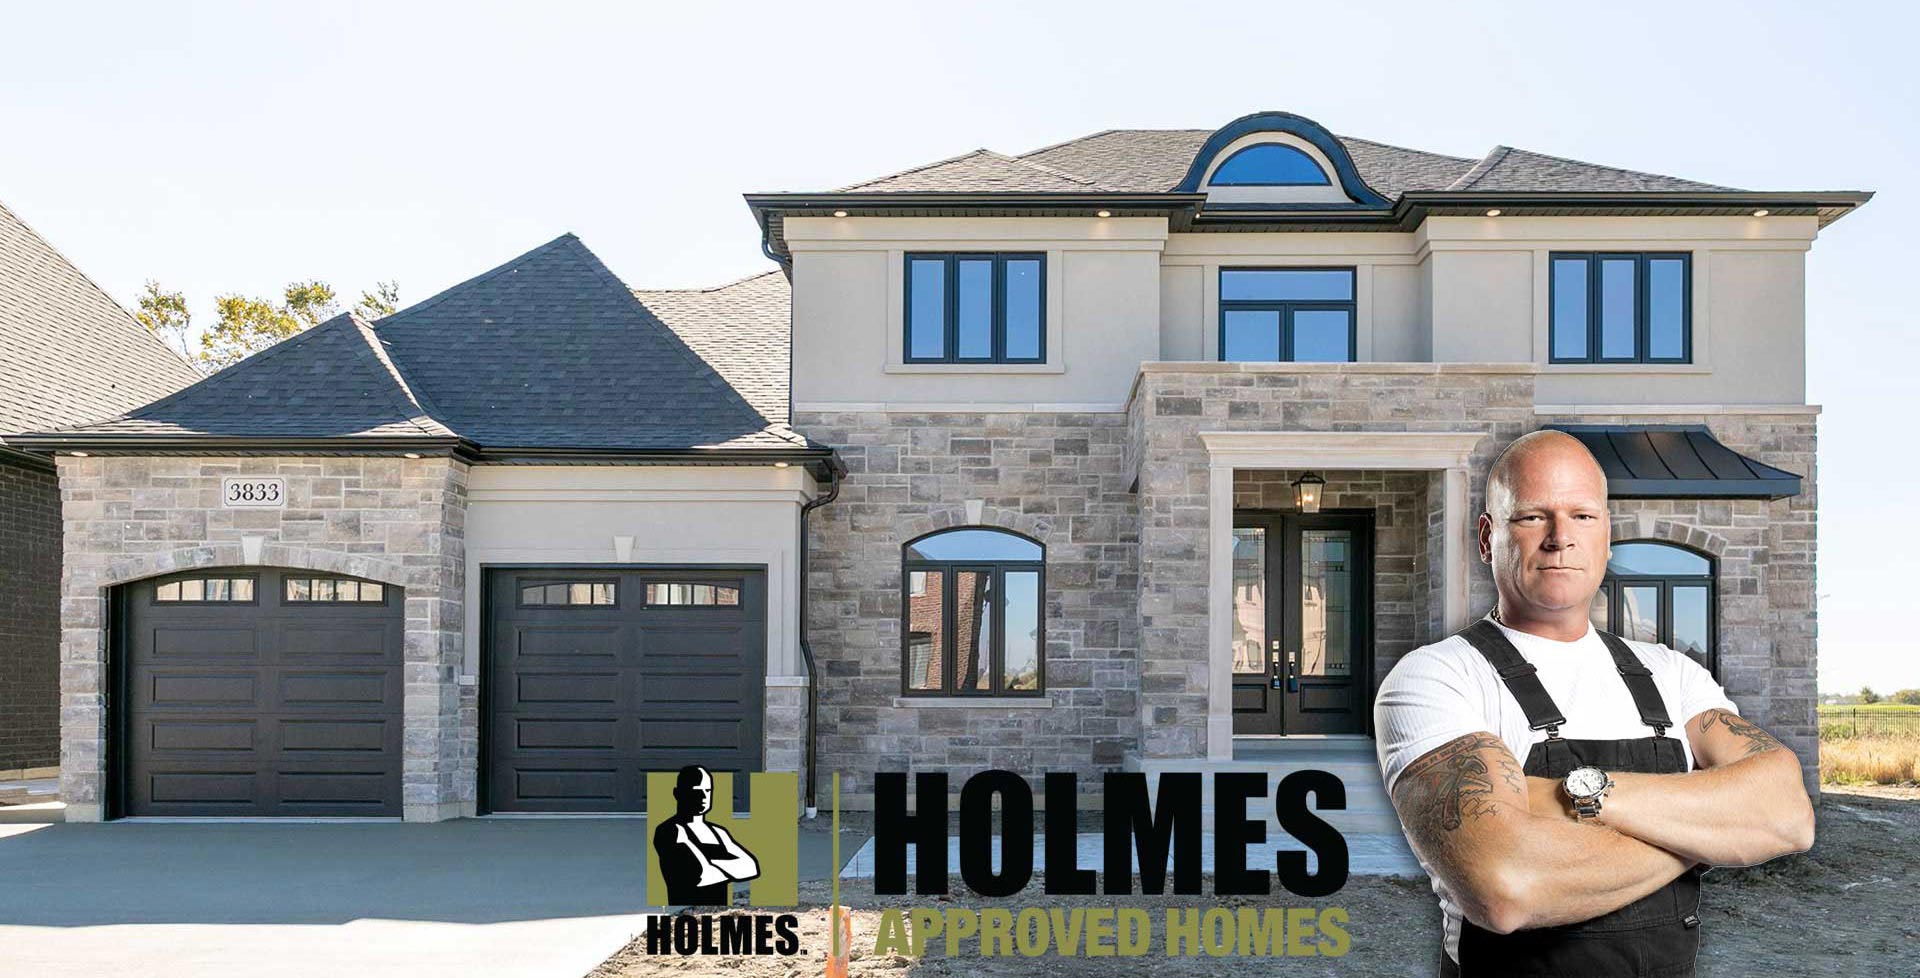 Mike Holmes Approved Homes